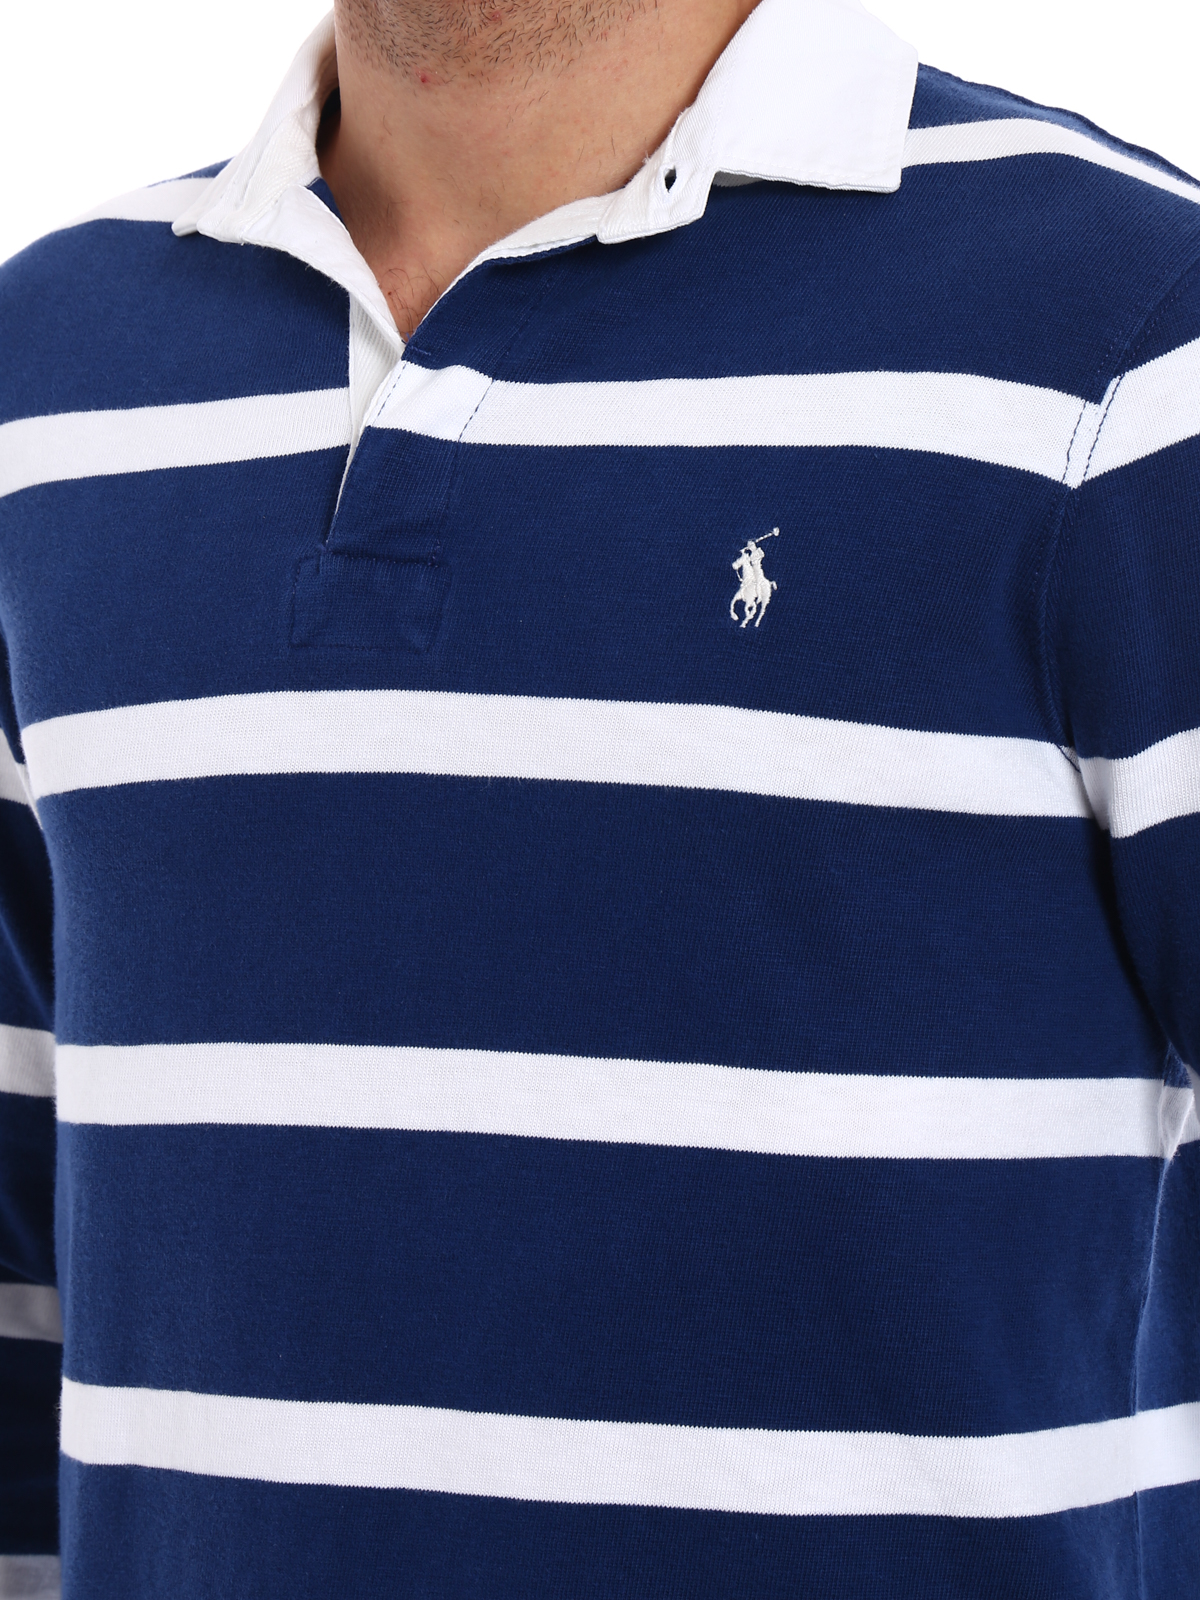 Iconic Rugby striped polo shirt 